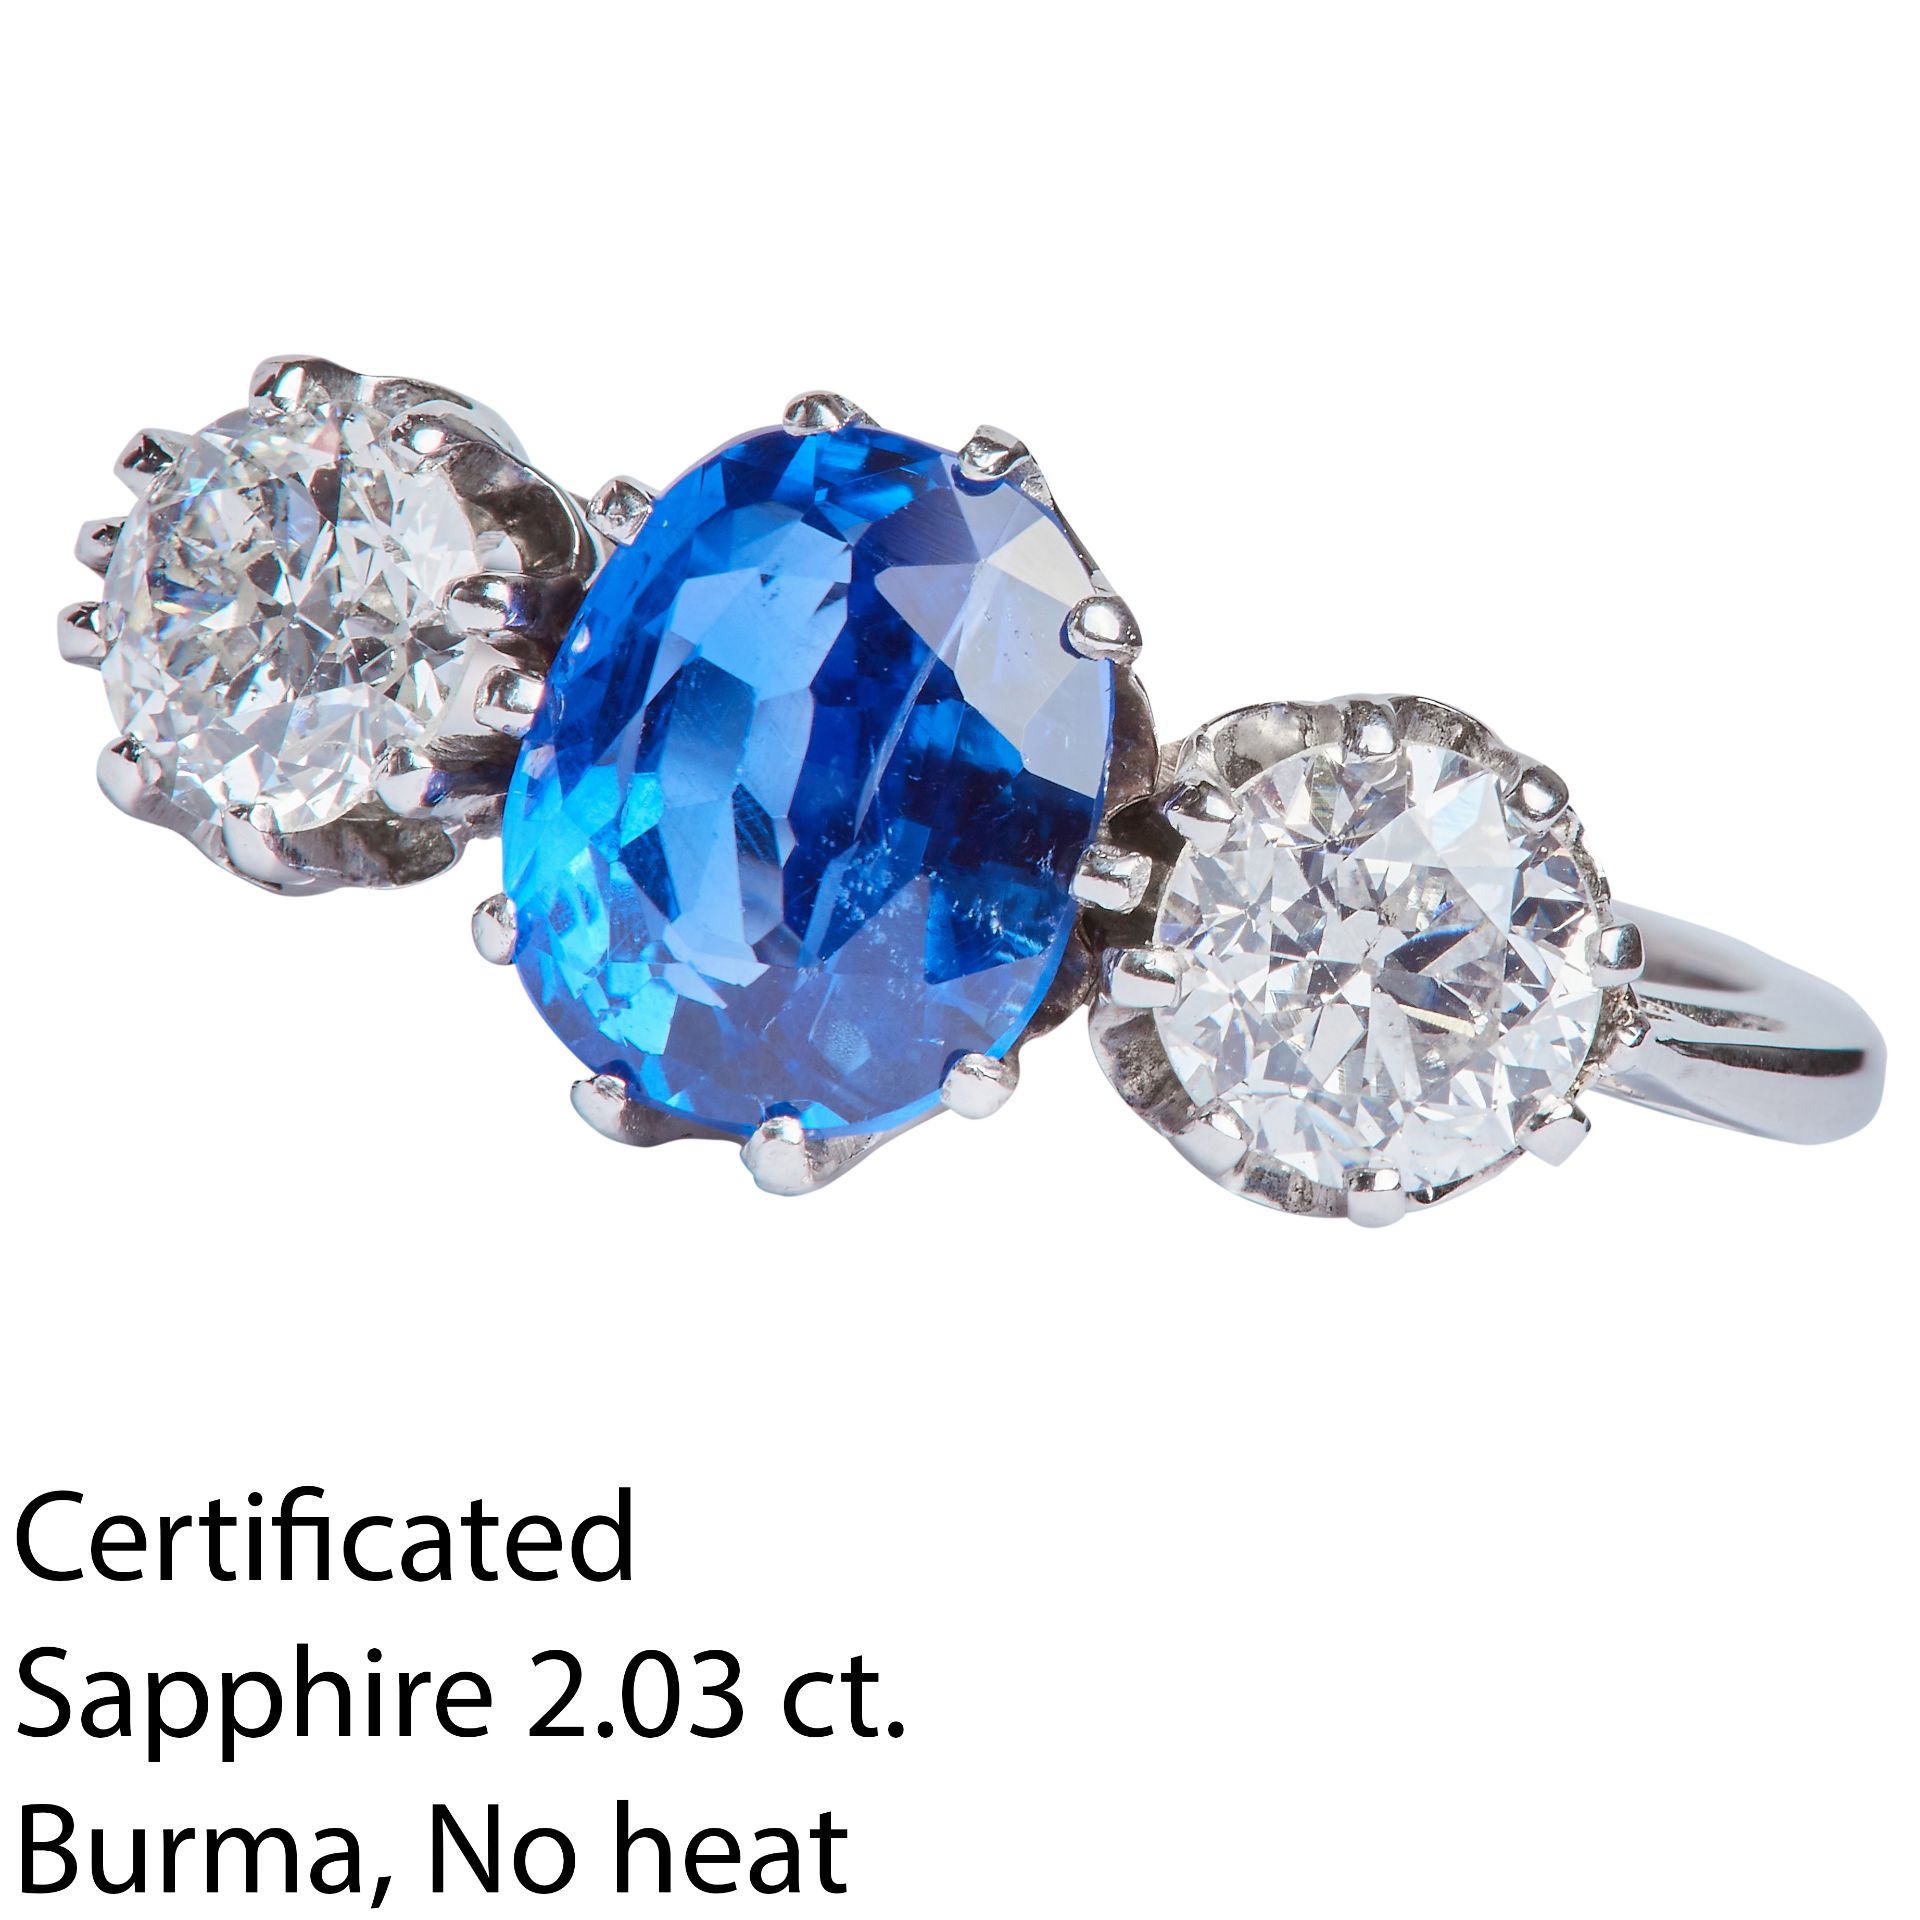 IMPORTANT SAPPHIRE AND DIAMOND 3-STONE RING